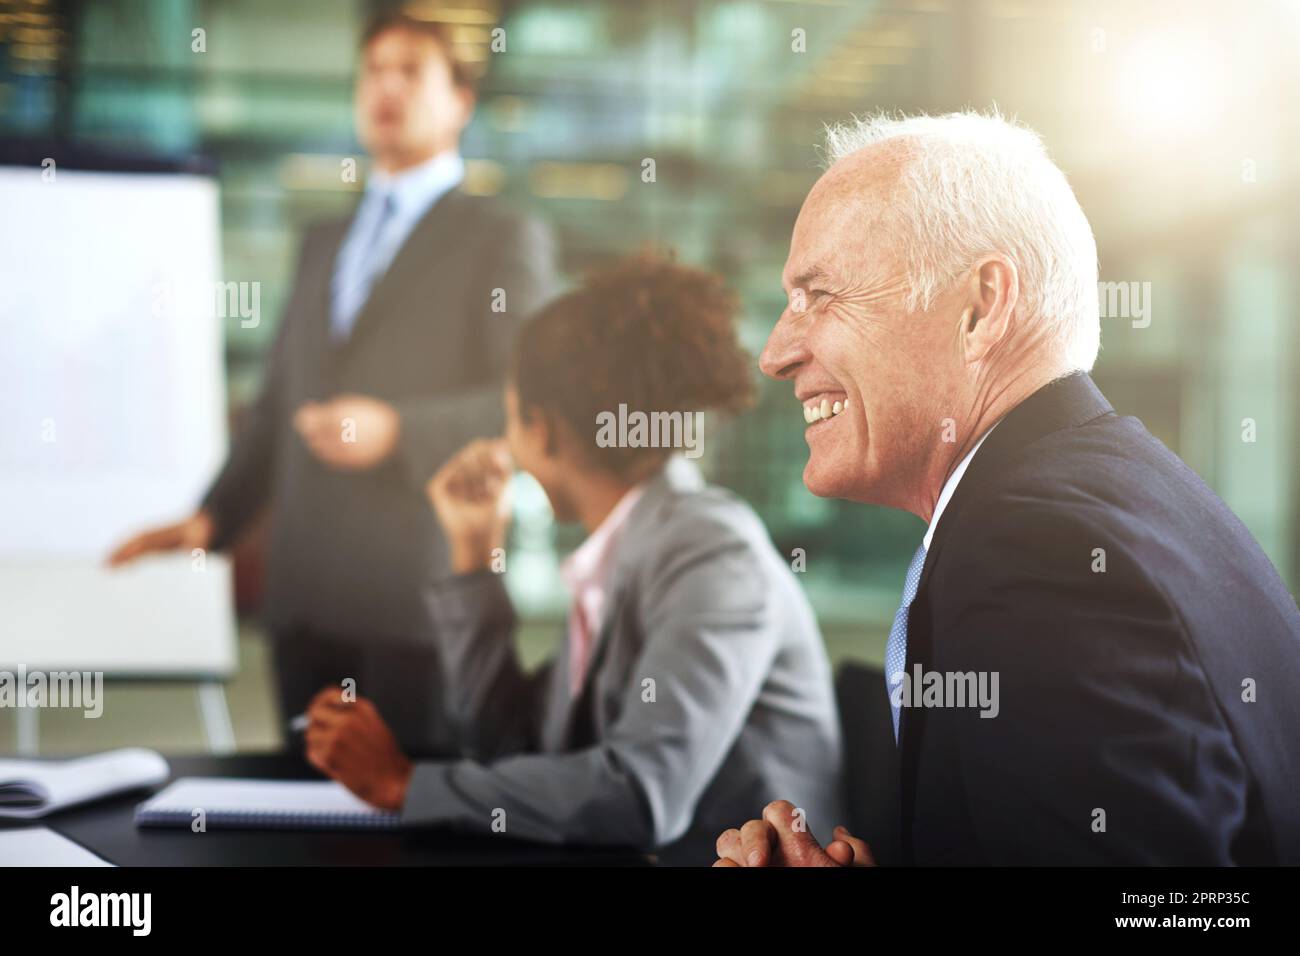 He couldnt be happier. a group of businesspeople listening to a presentation. Stock Photo